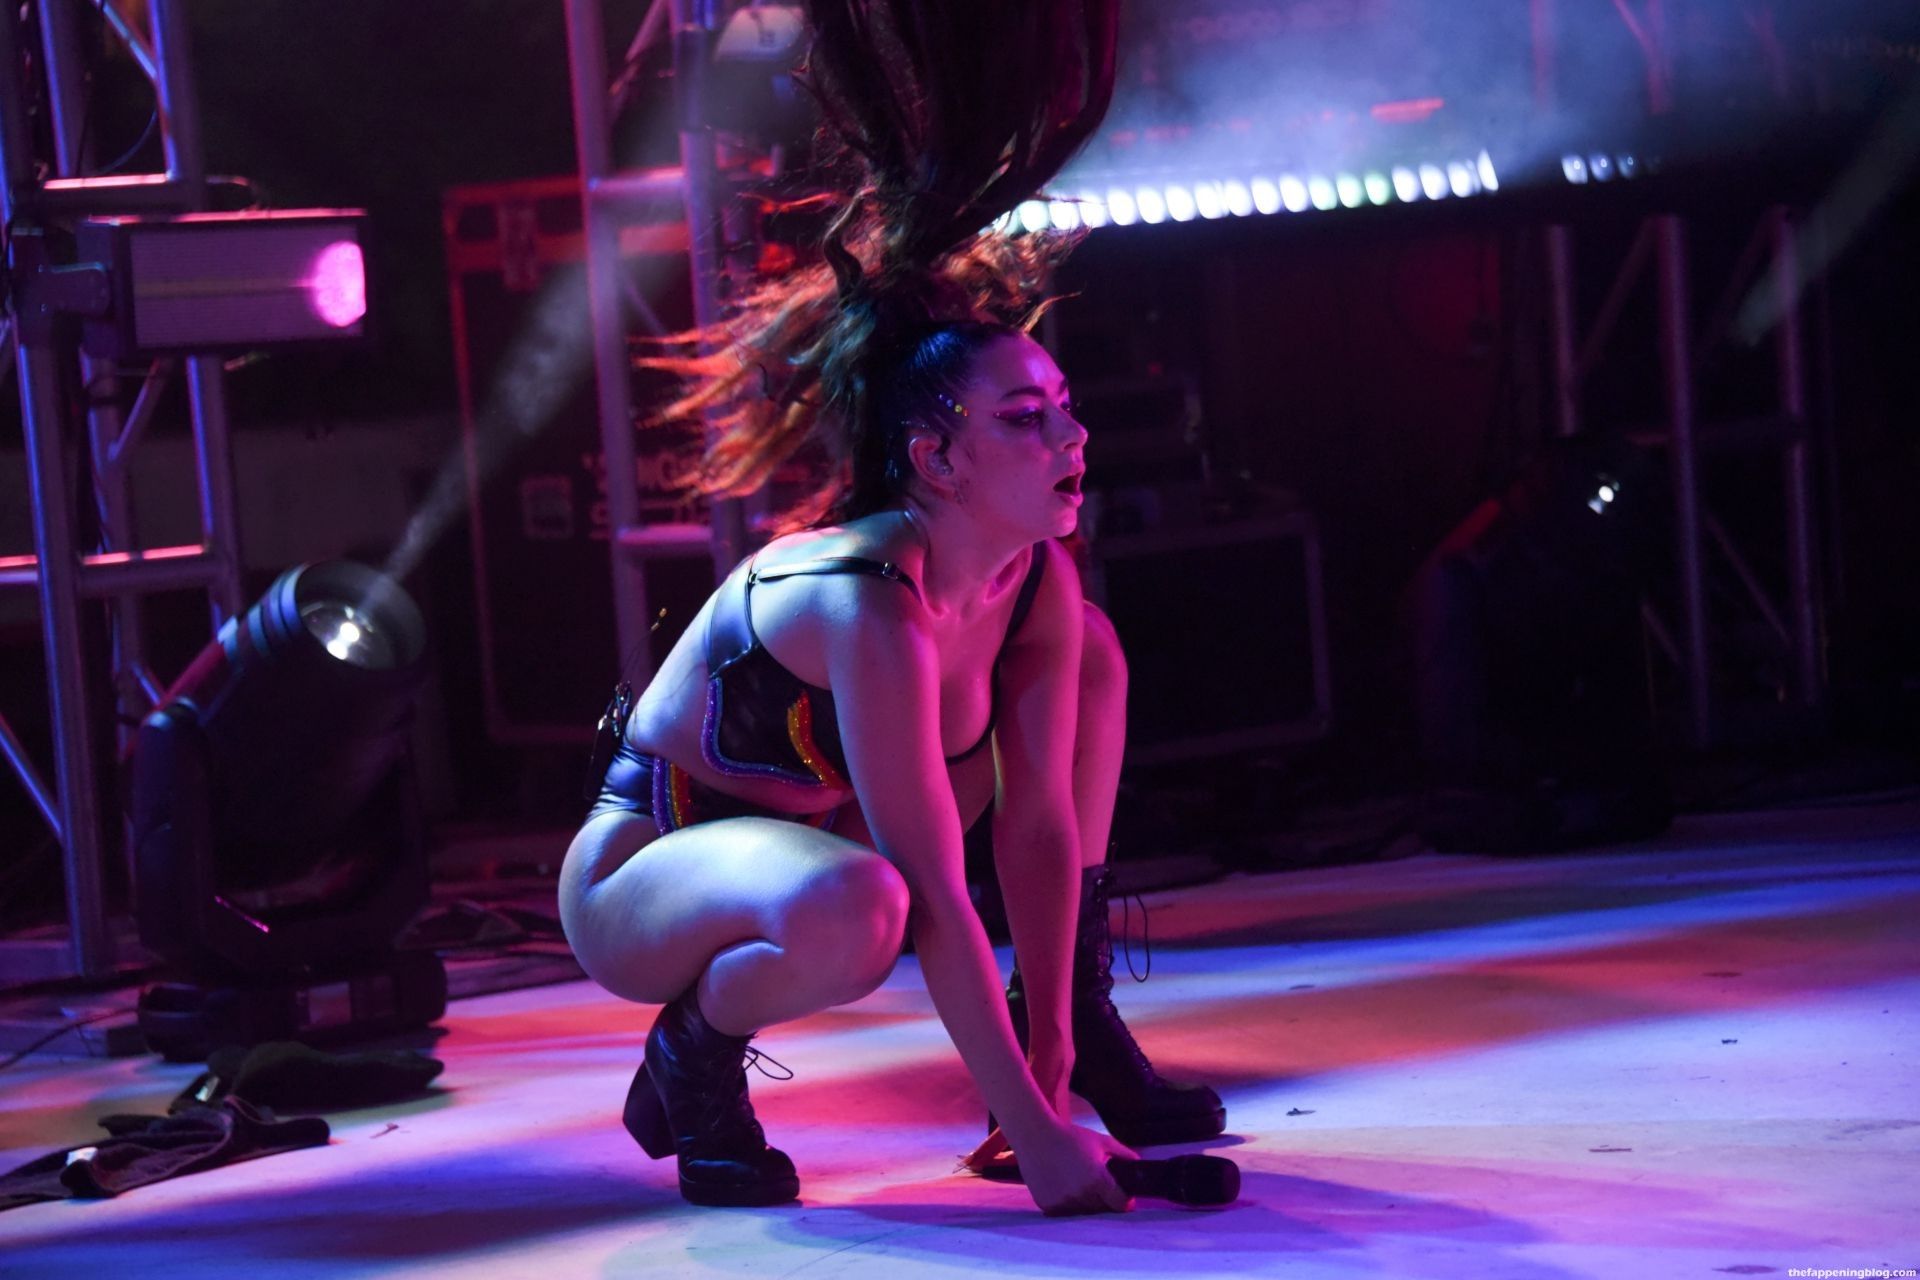 Charli-XCX-Sexy-on-Stage-12-thefappeningblog.com_.jpg